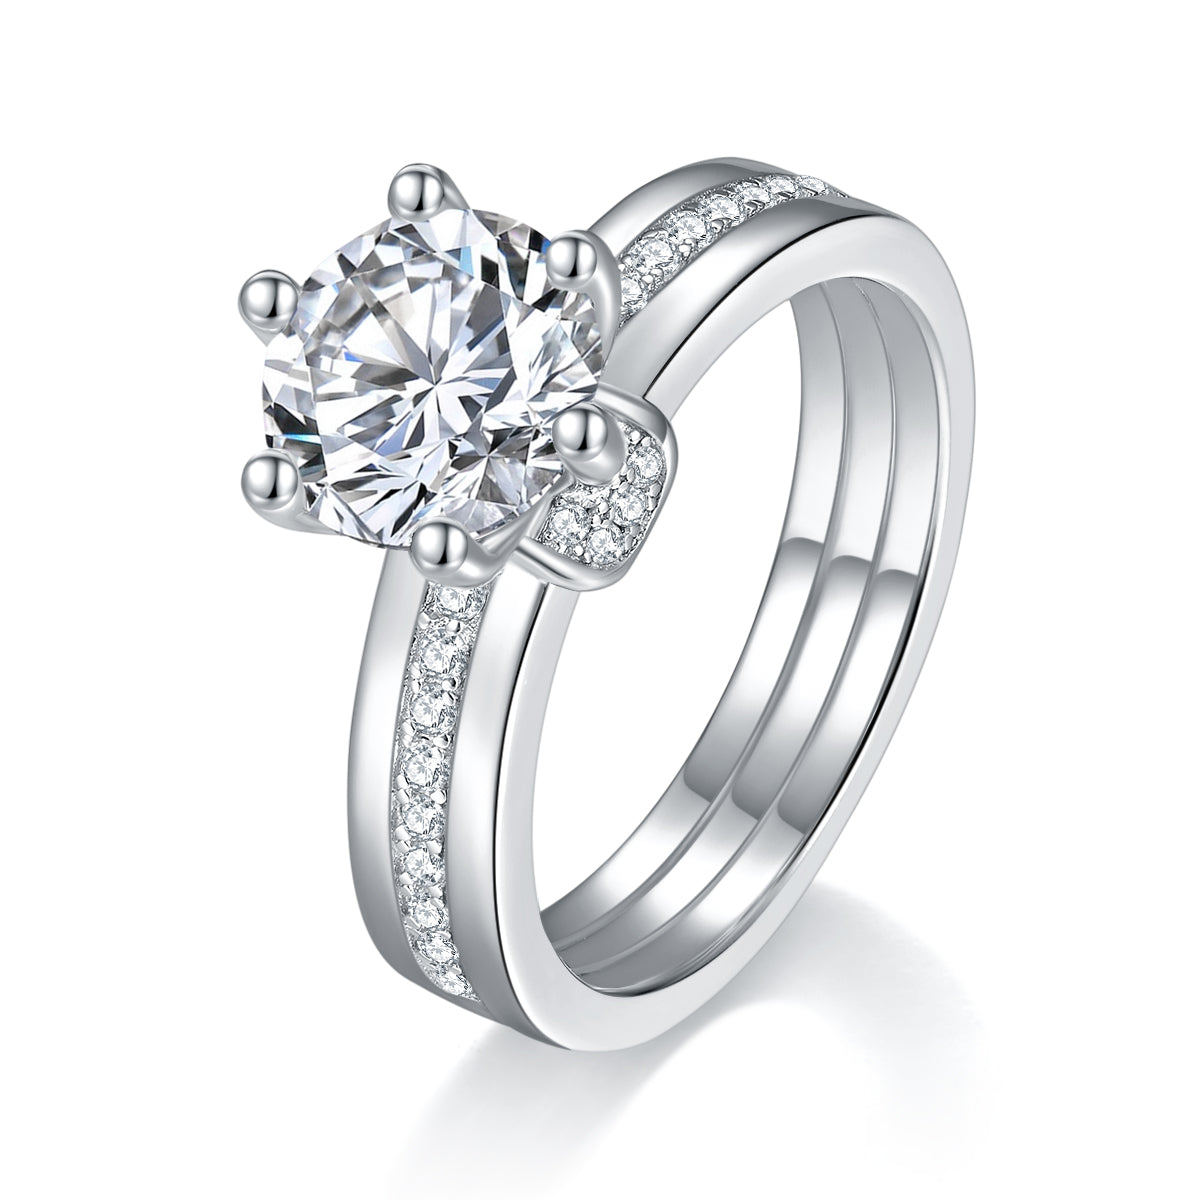 IE0227 2CT MOISSANITE ENGAGEMENT RING IN STERLING SILVER